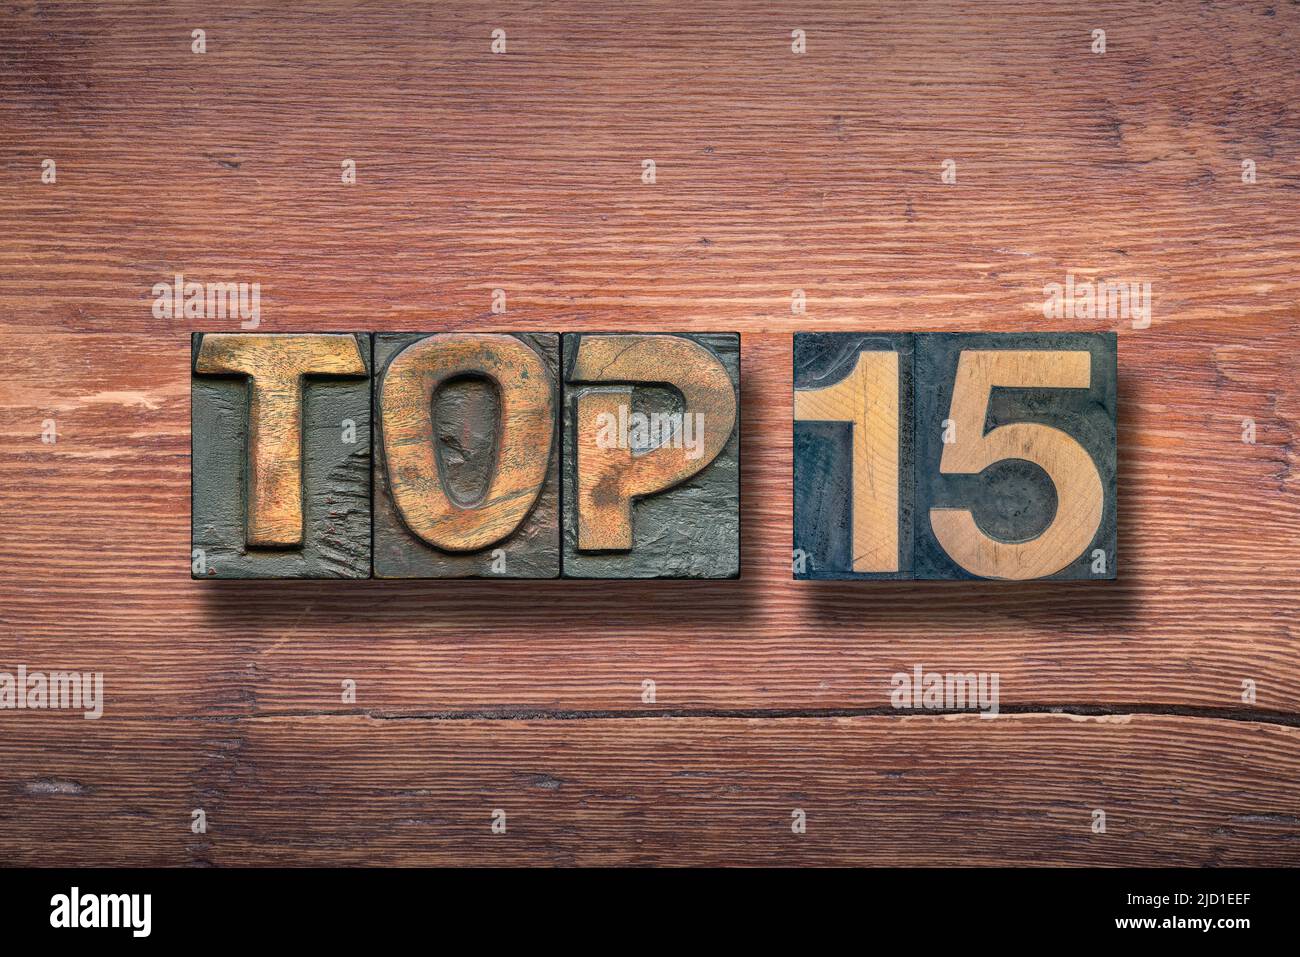 top 15 combined on vintage varnished wooden surface Stock Photo